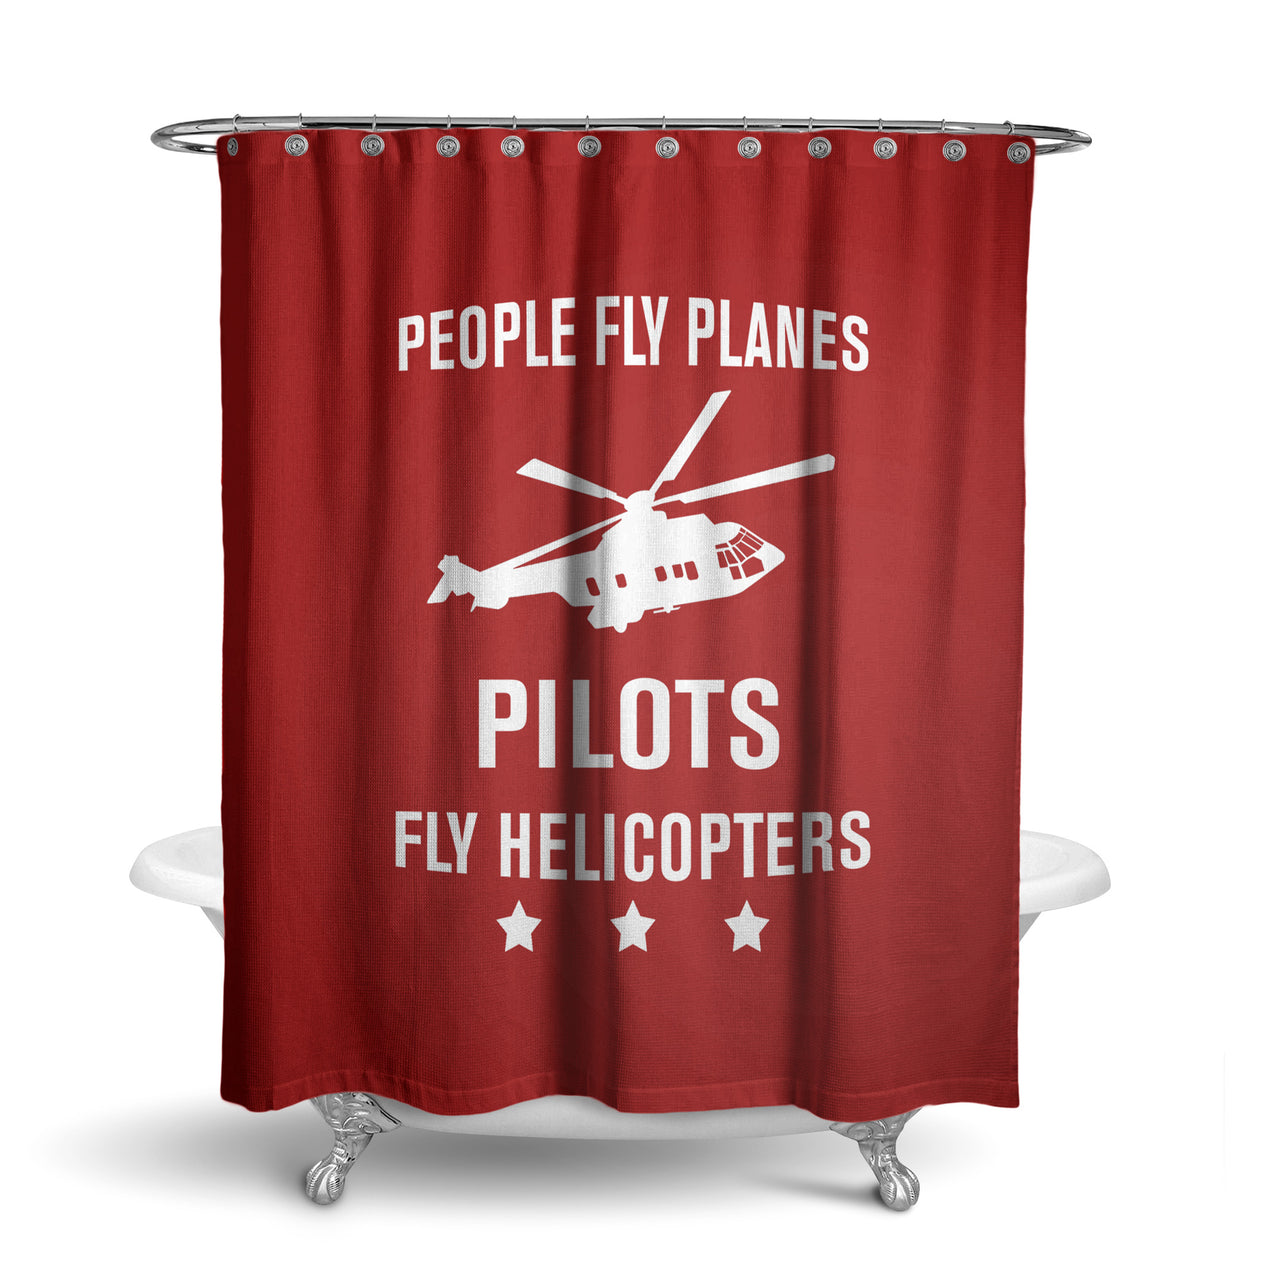 People Fly Planes Pilots Fly Helicopters Designed Shower Curtains